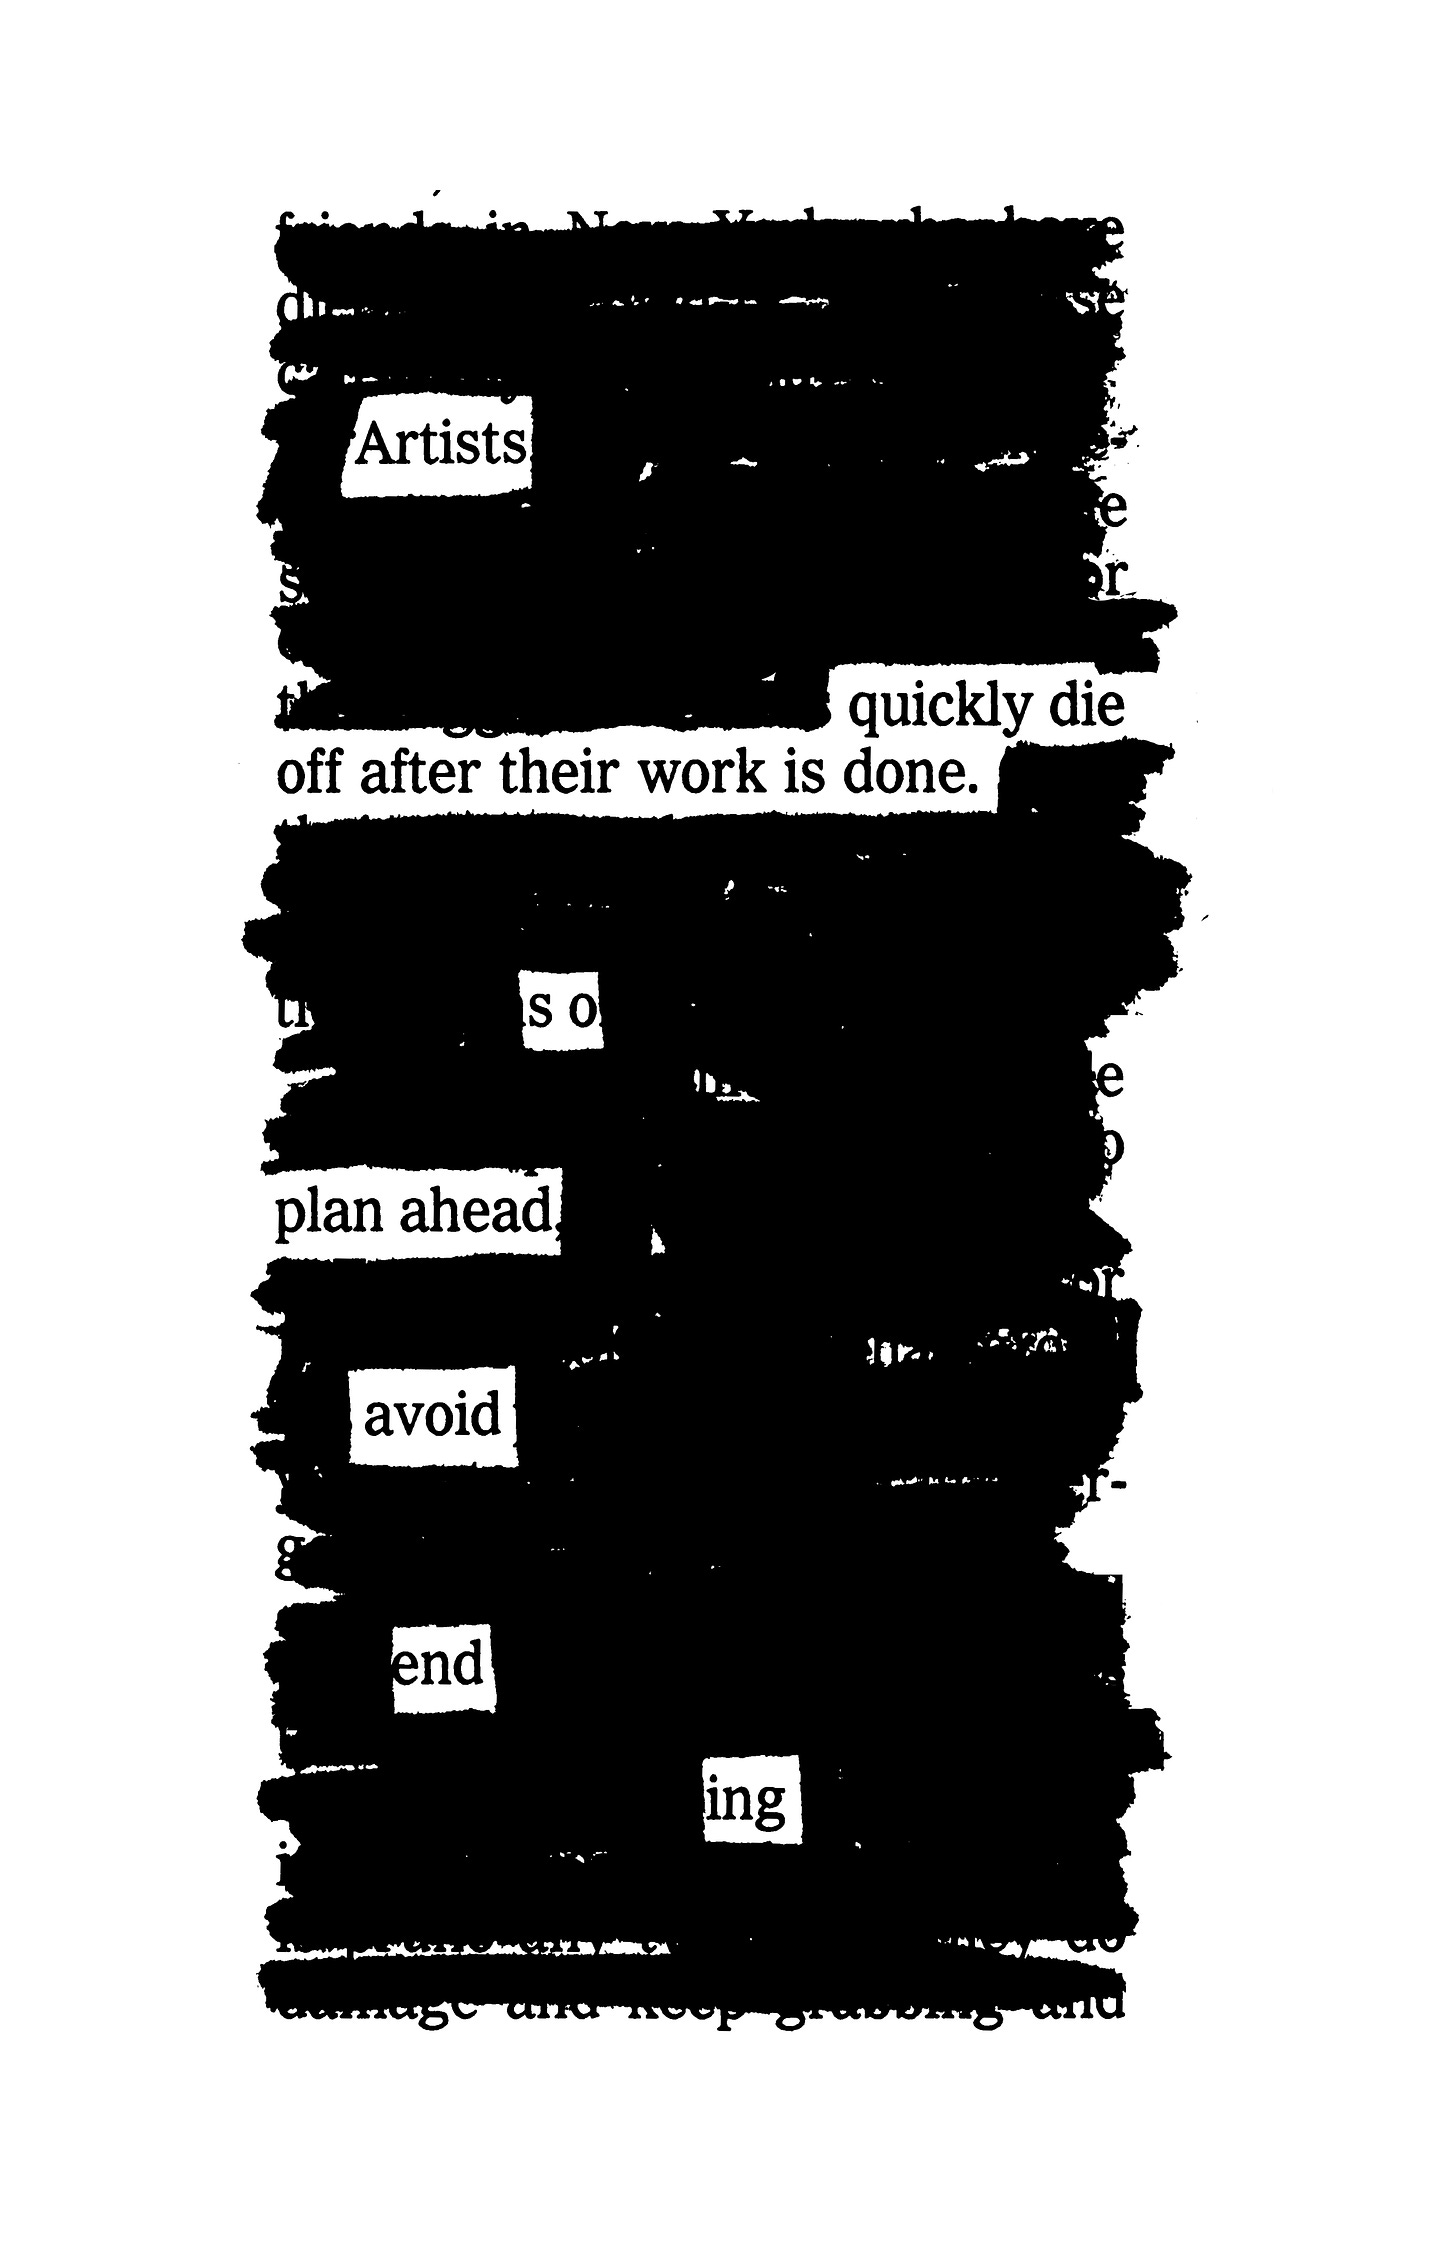 A blackout poem that reads: Artists quickly die off after their work is done so plan ahead avoid ending